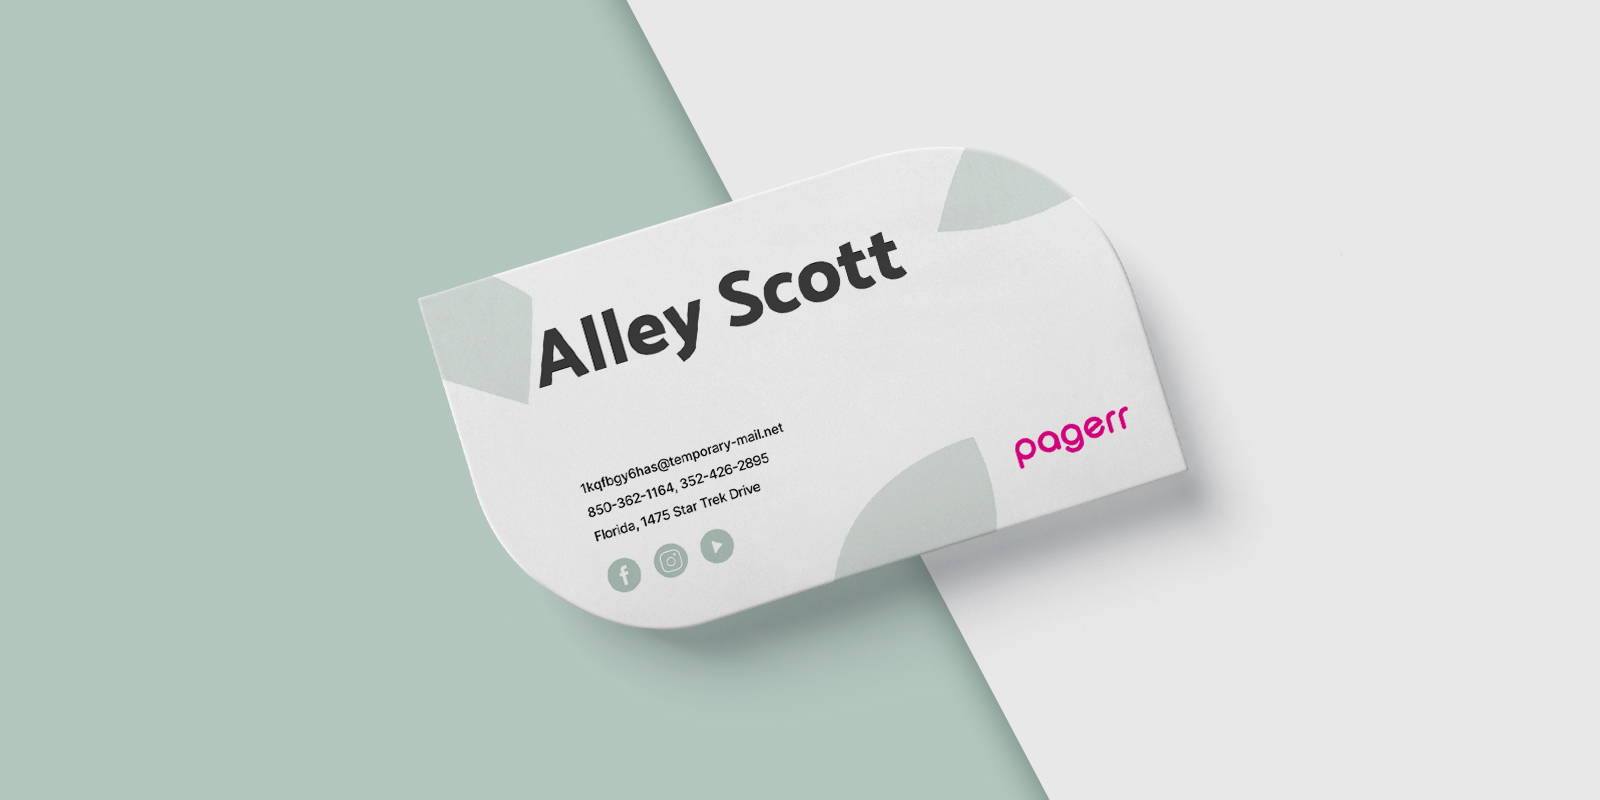 Special shape business cards in Seville - Print with Pagerr